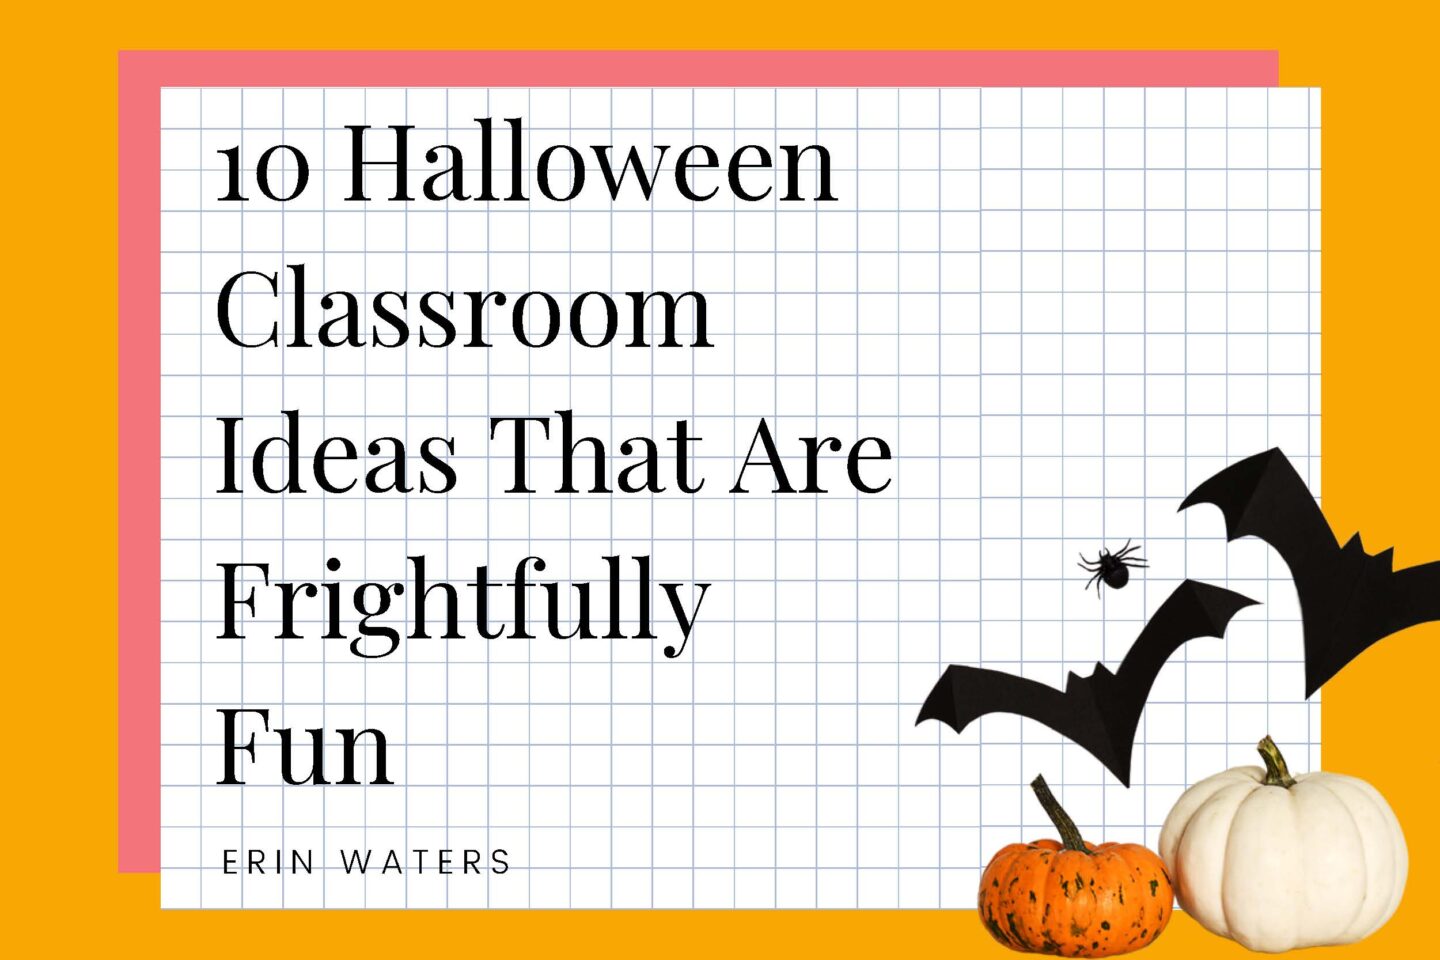 10 Halloween Classroom Ideas That Are Frightfully Fun title page; 2 bats and a black spider above a small orange pumpkin and white pumpkin.